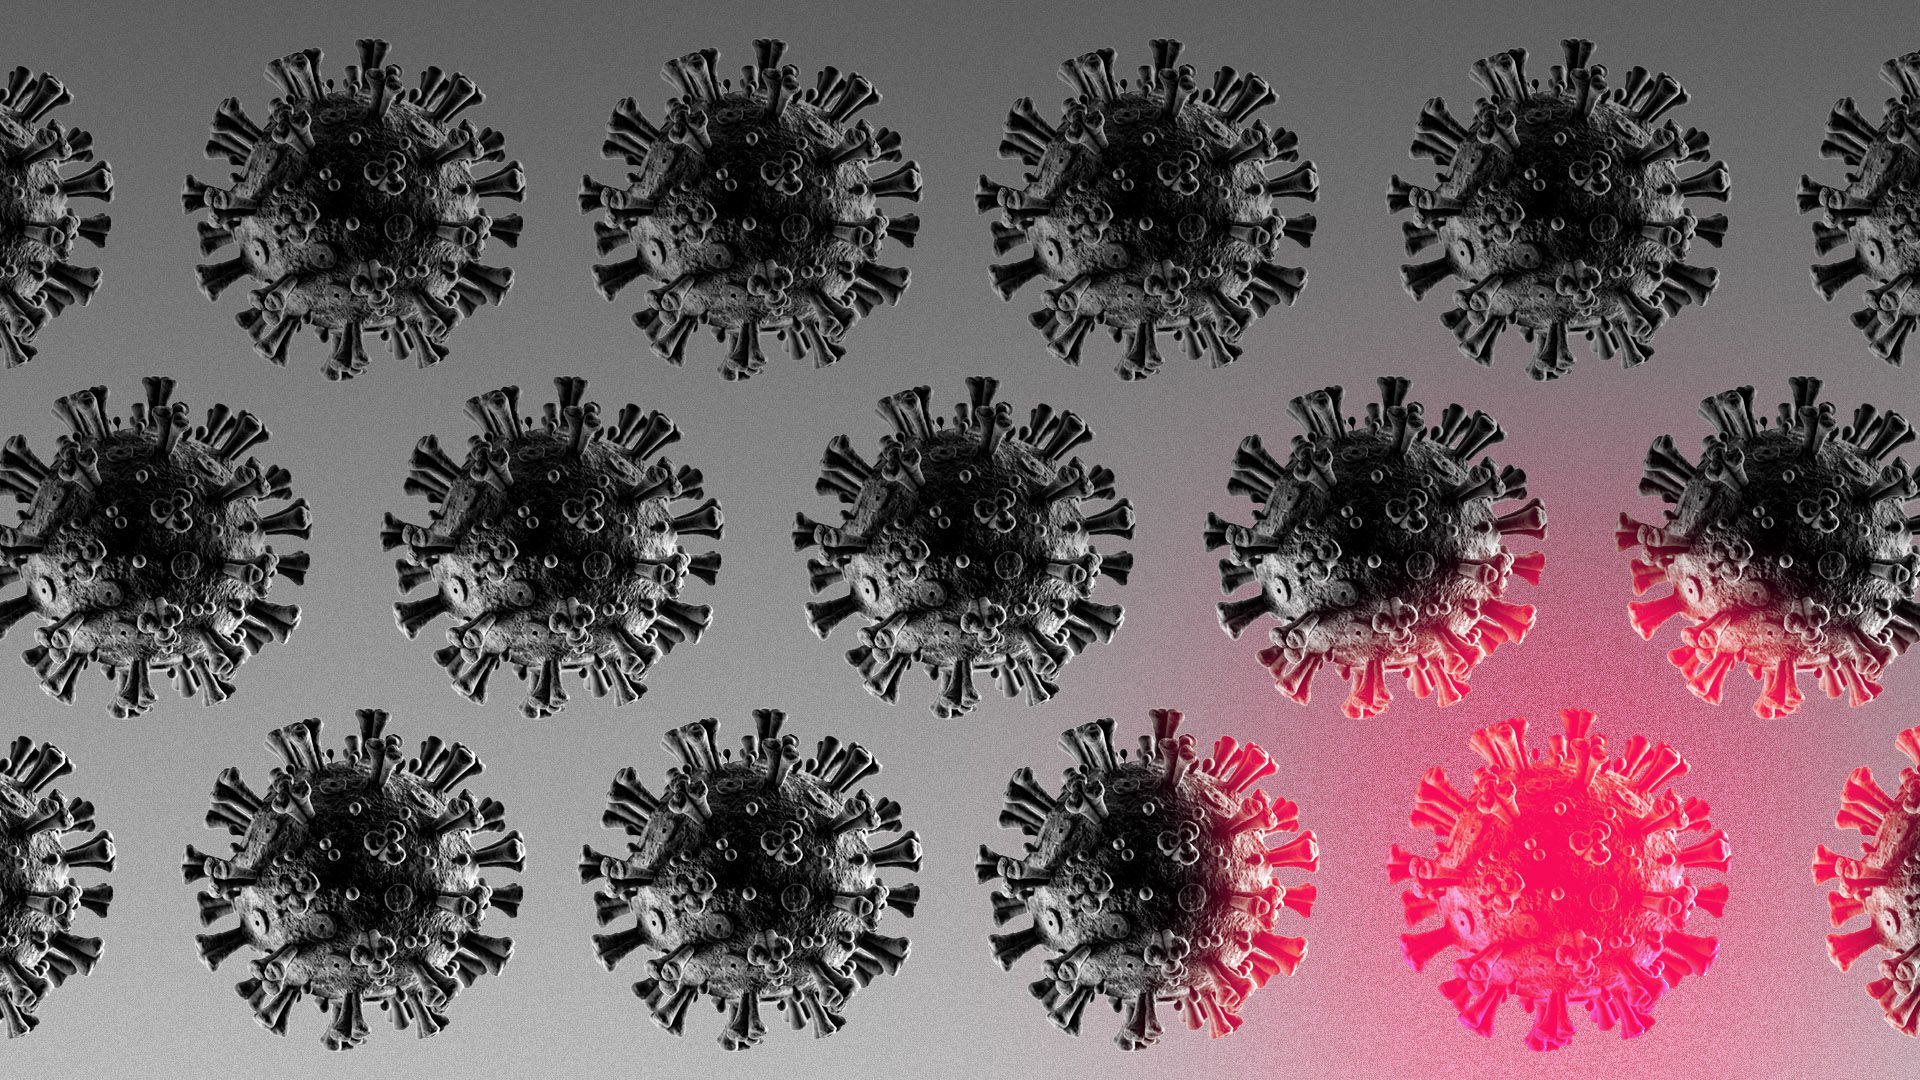 Illustration of a pattern of gray virus cells with one lighting up in red